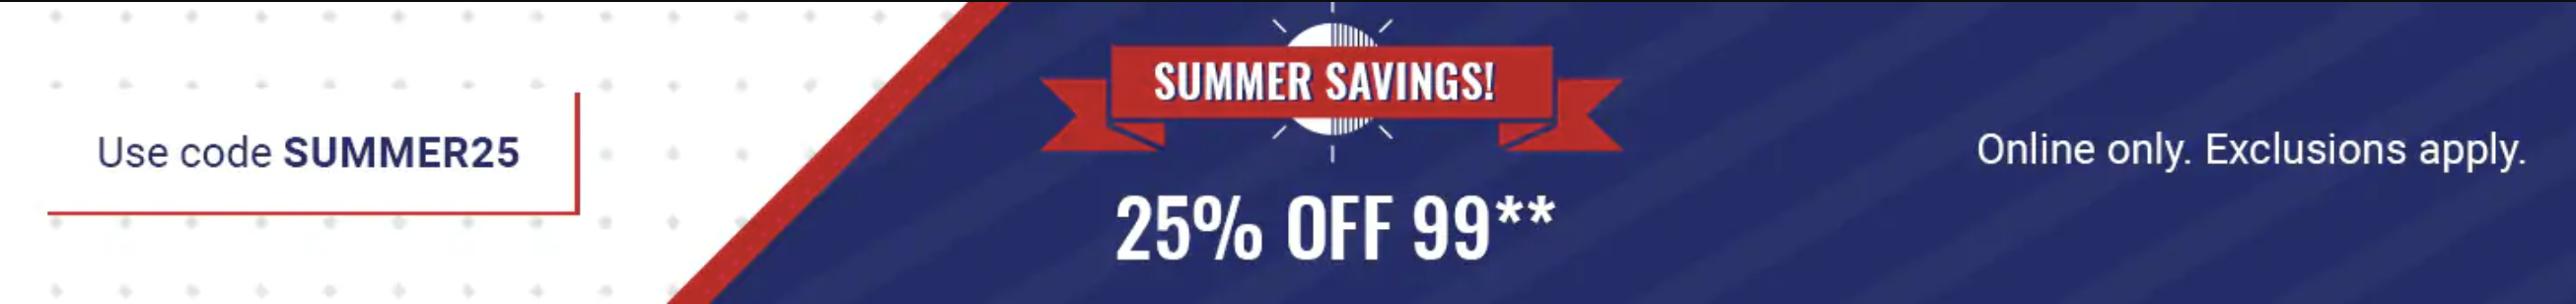 champs sports memorial day sale 2019 banner